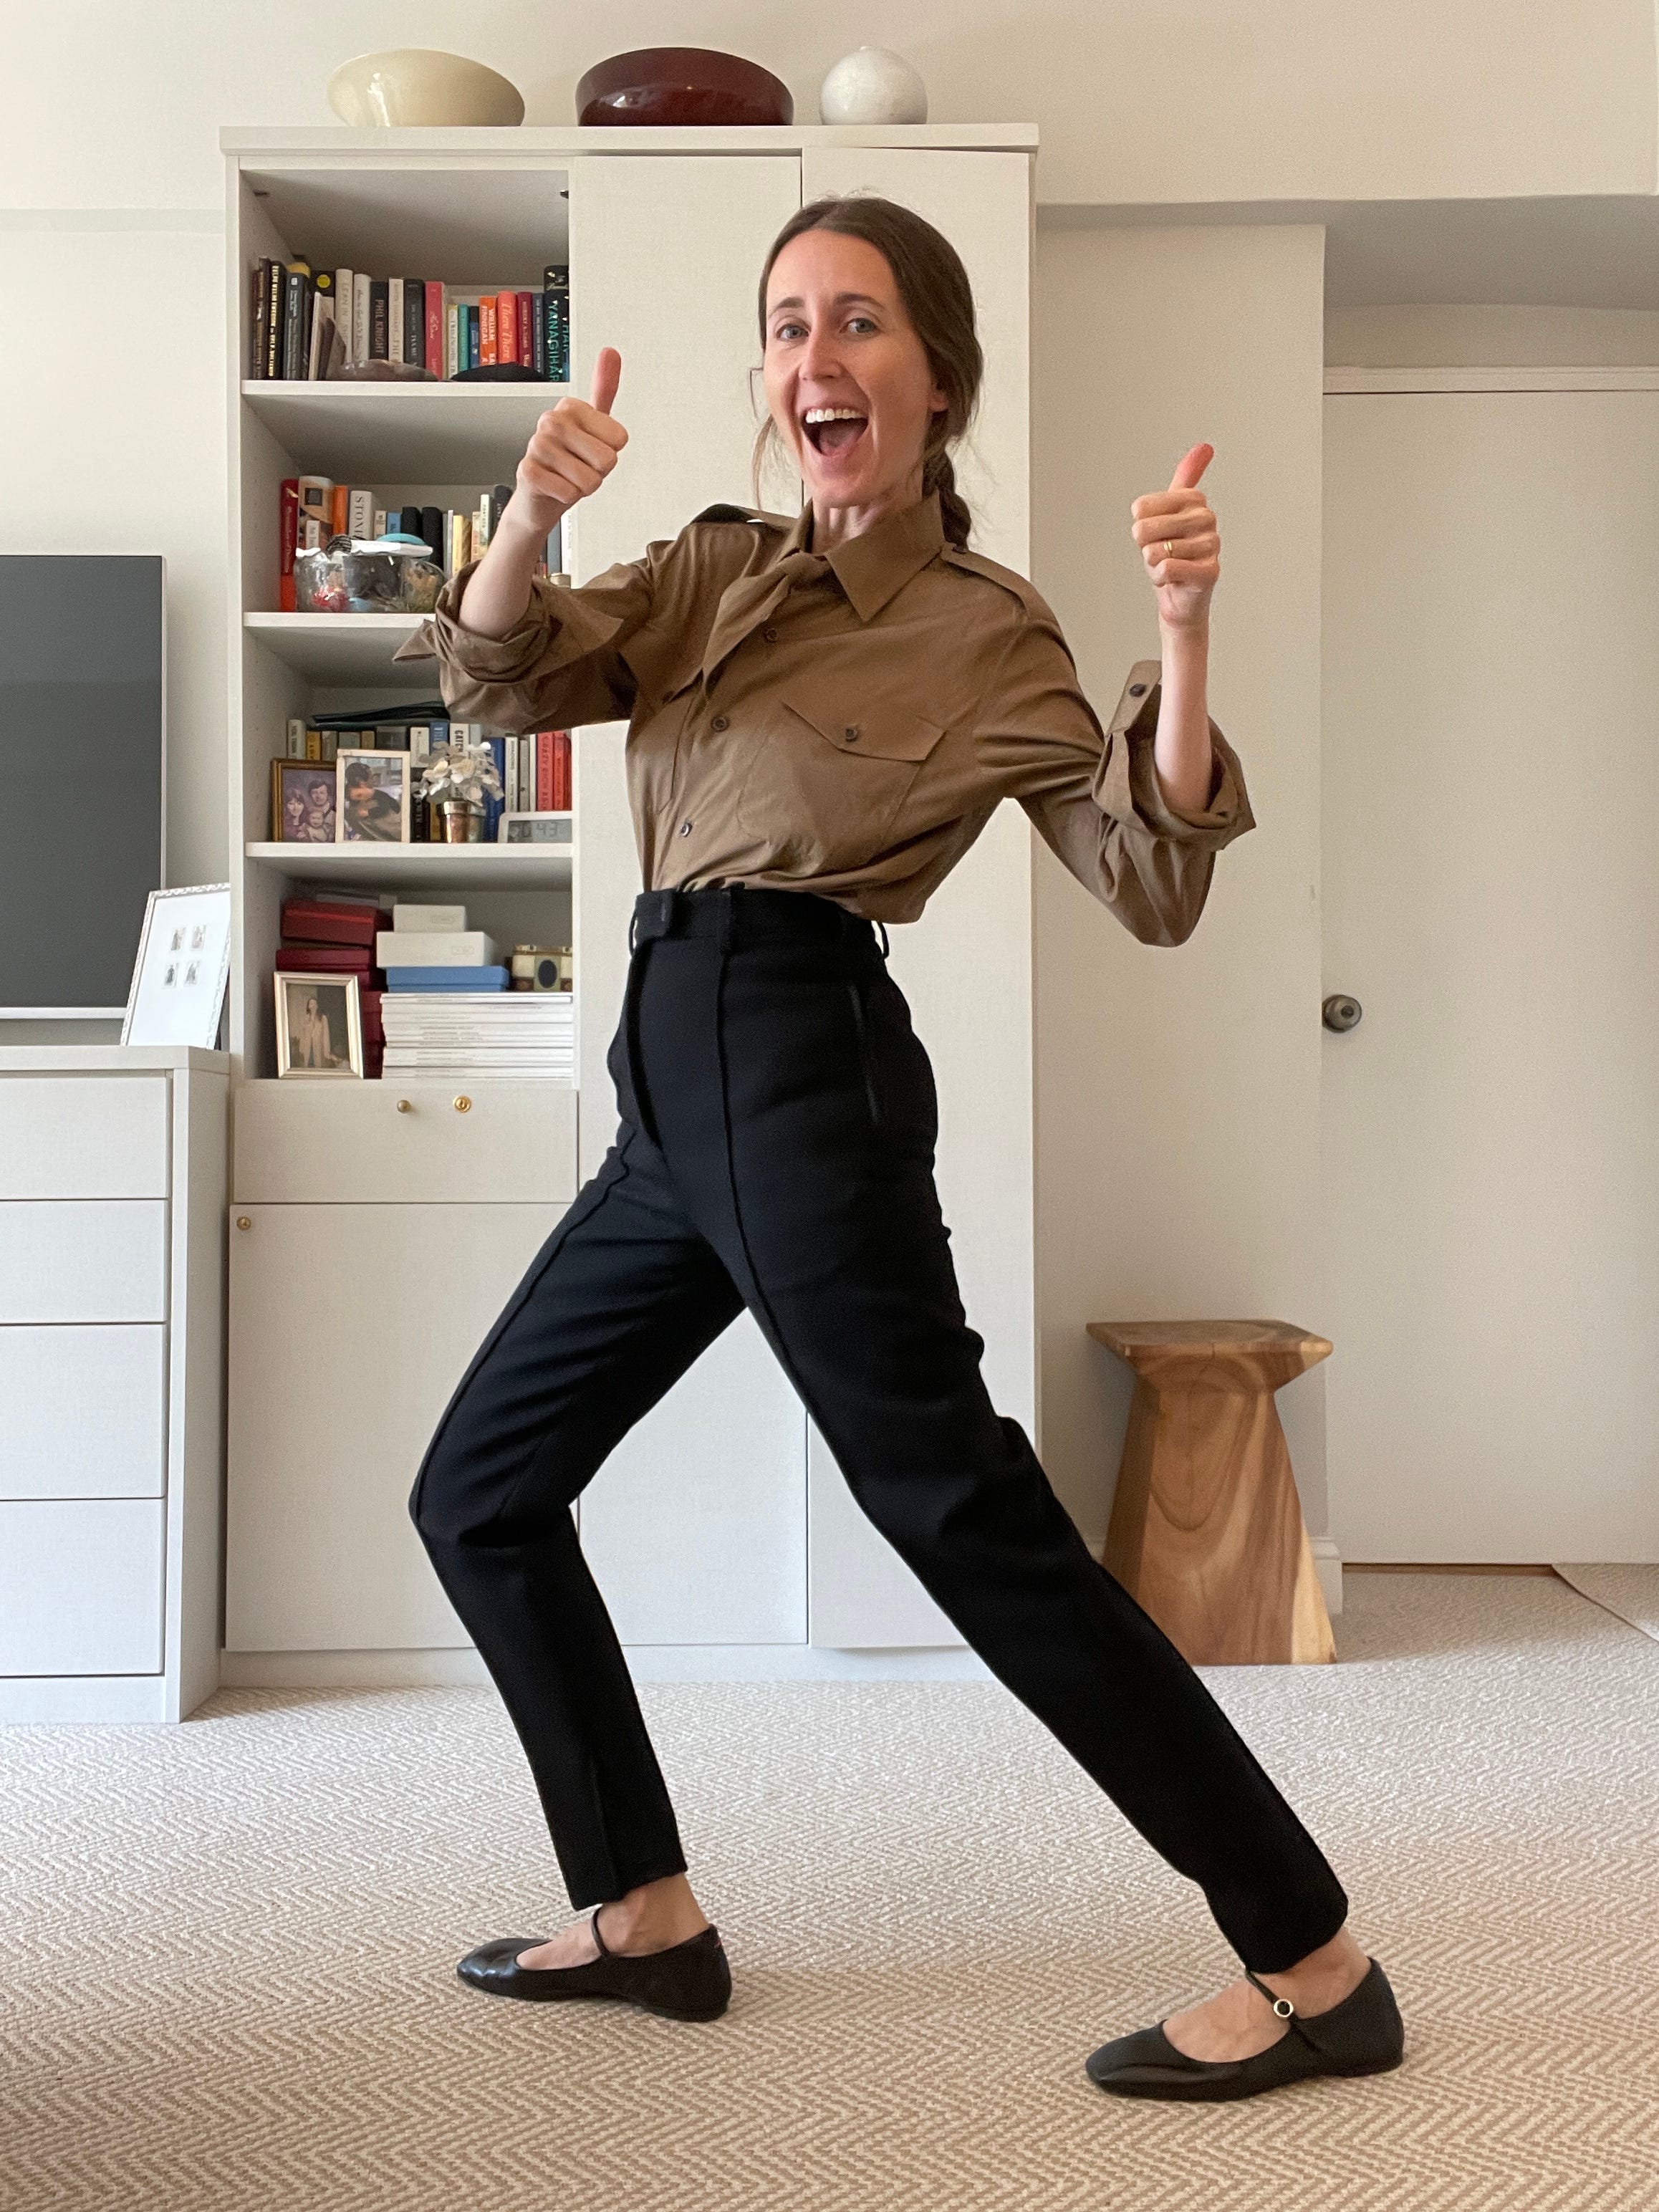 The Best Black Pants For Work - by Becky Malinsky